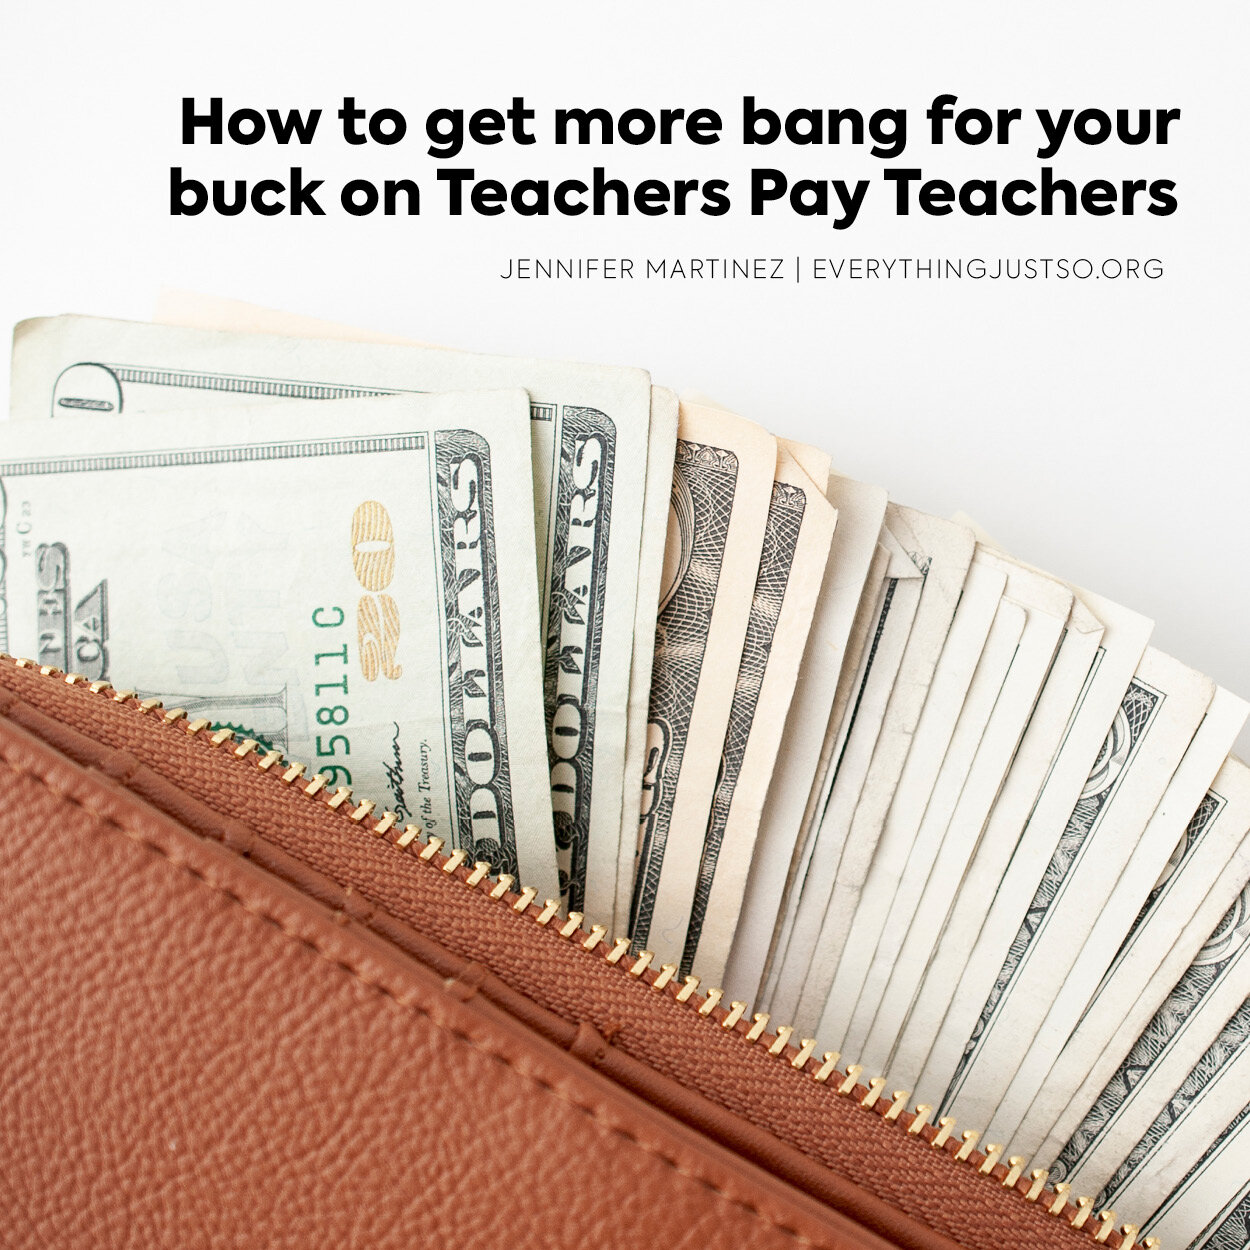 Teachers Pay Teachers Sitewide Sale: 4 Tips for Saving the MOST